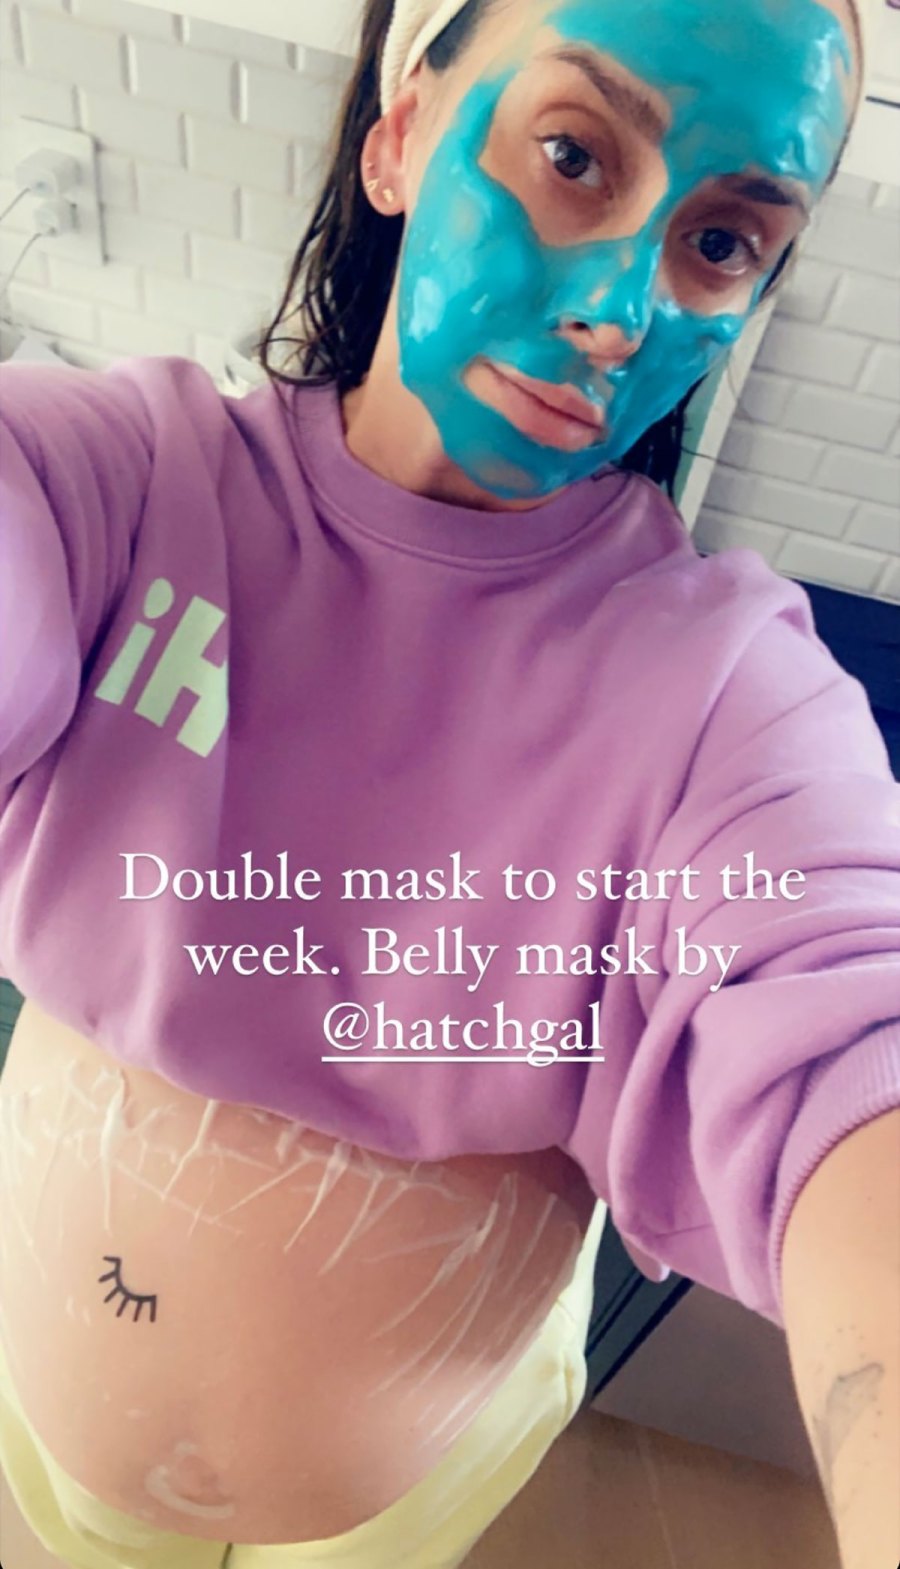 Jennifer Love Hewitt Covers Her Baby Bump With $12 Sheet Mask